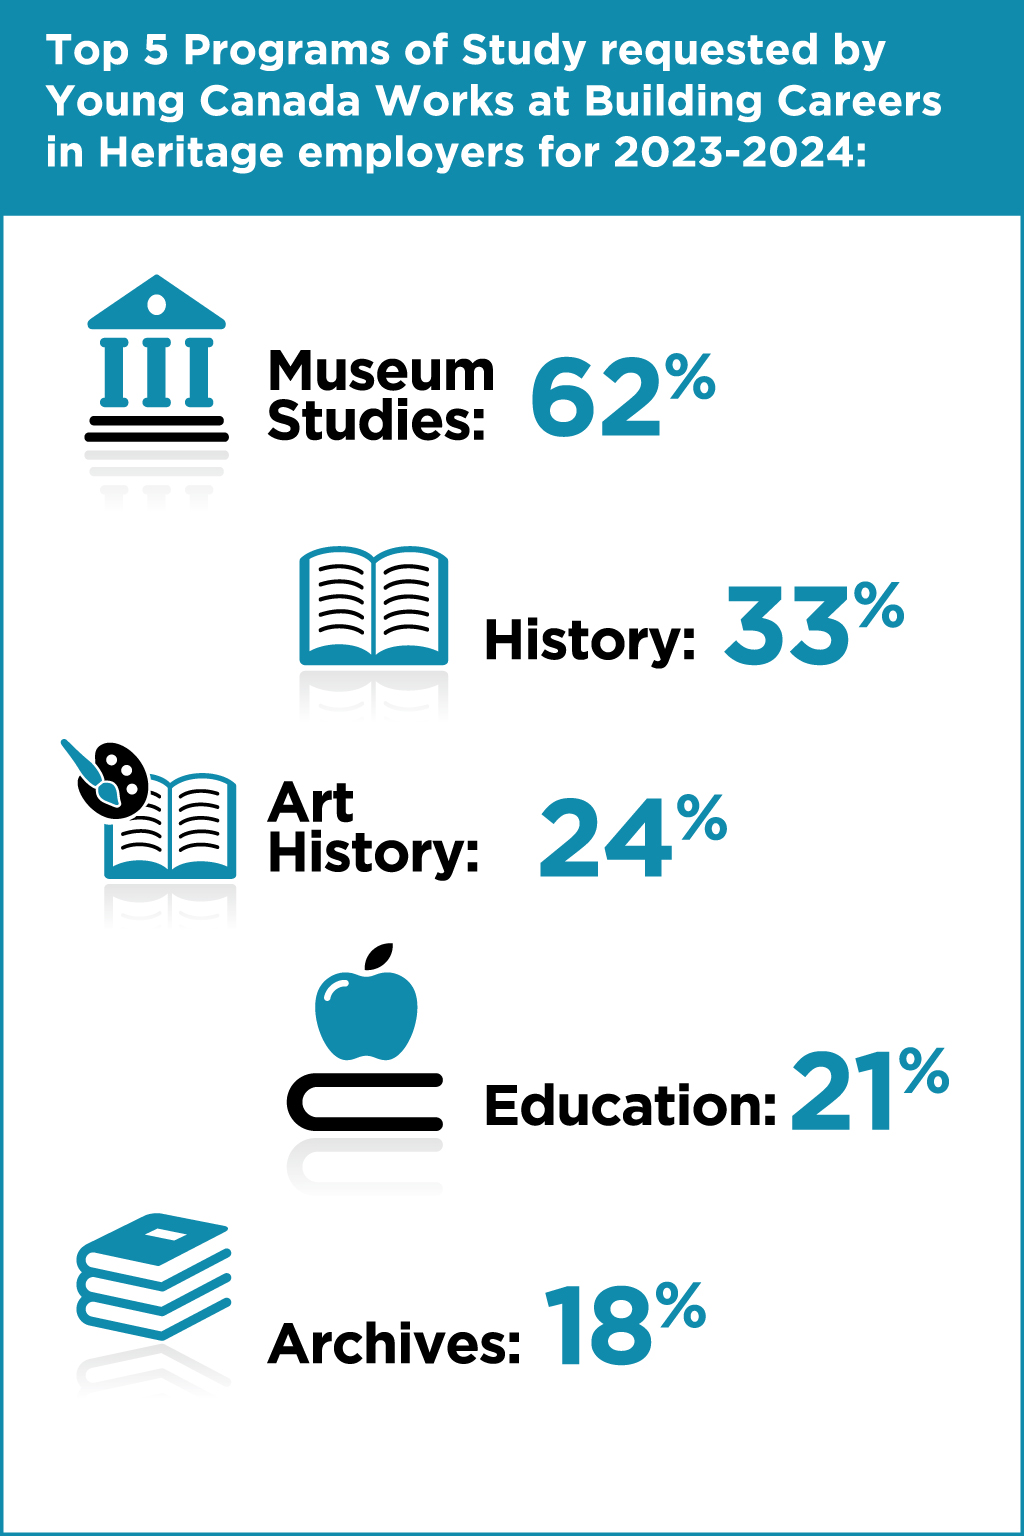 Top 5 Programs of Study requested by Young Canada Works at Building Careers in Heritage employers for 2023-2024: